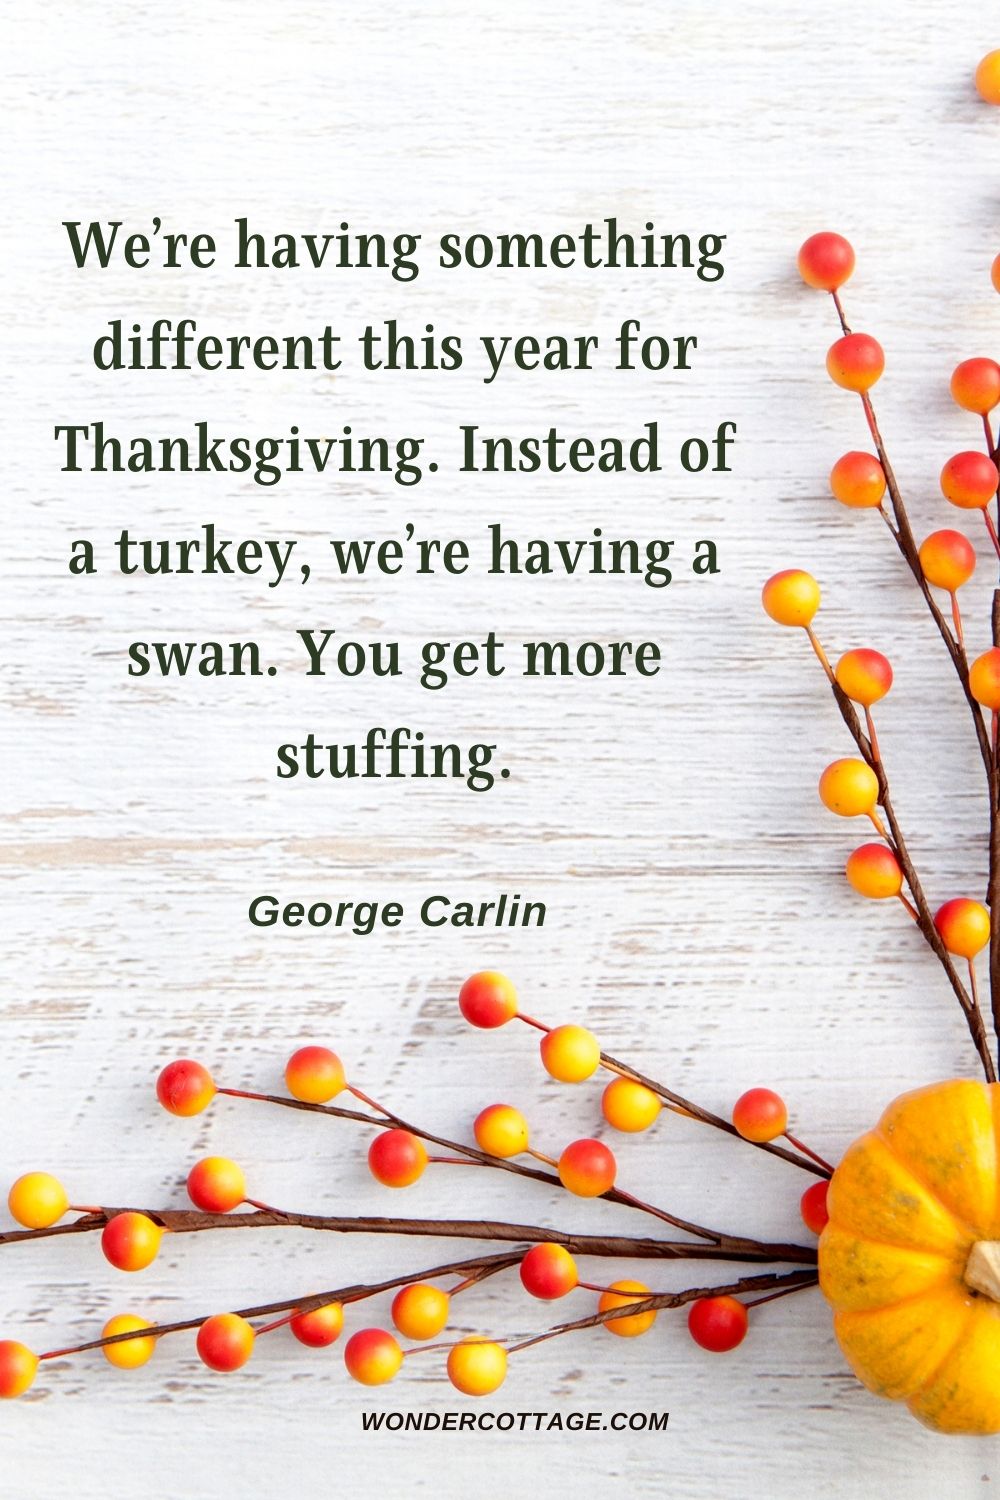 We’re having something different this year for Thanksgiving. Instead of a turkey, we’re having a swan. You get more stuffing. George Carlin